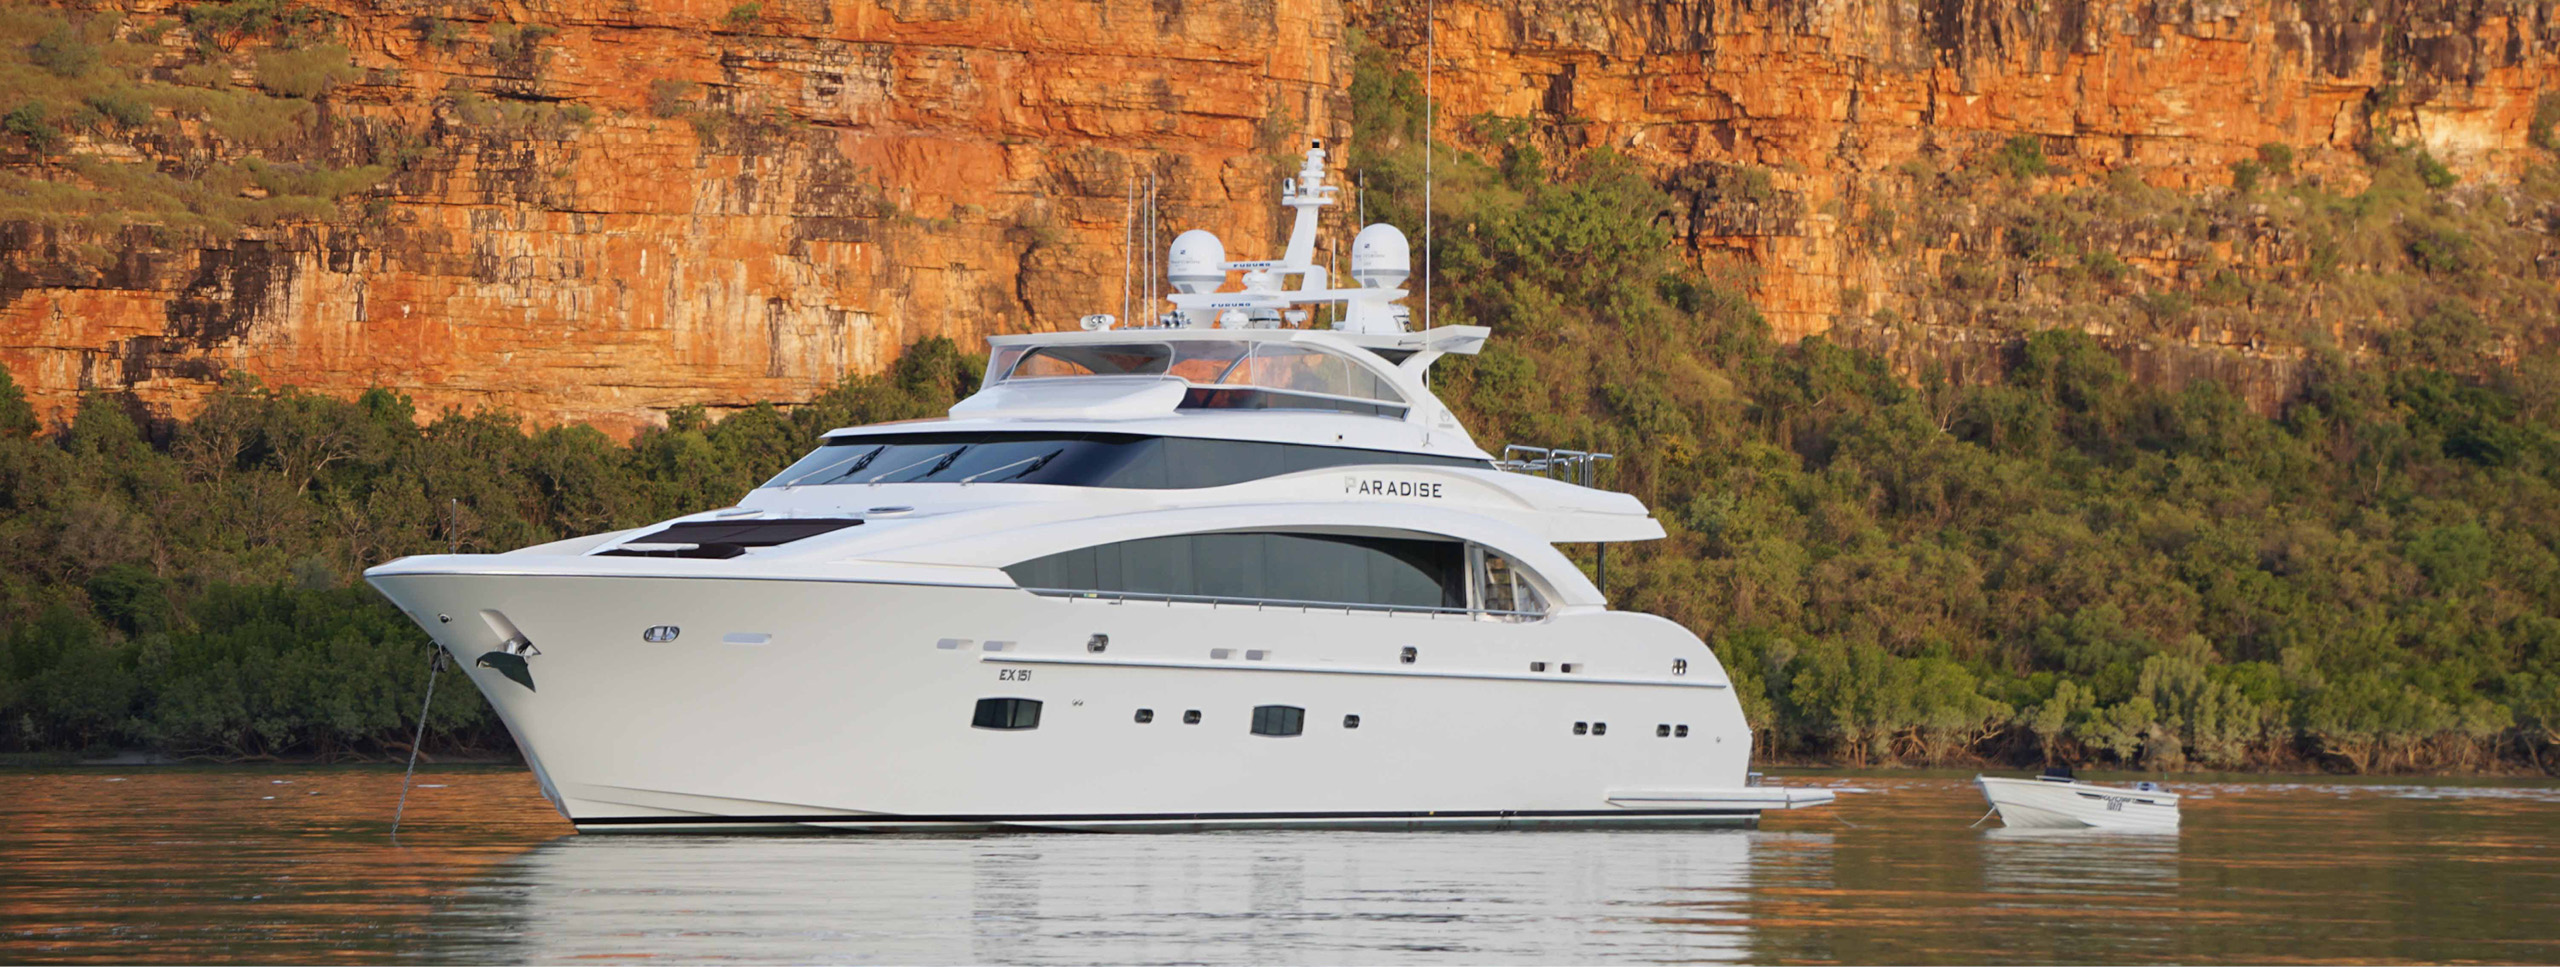 cheap yachts for sale perth